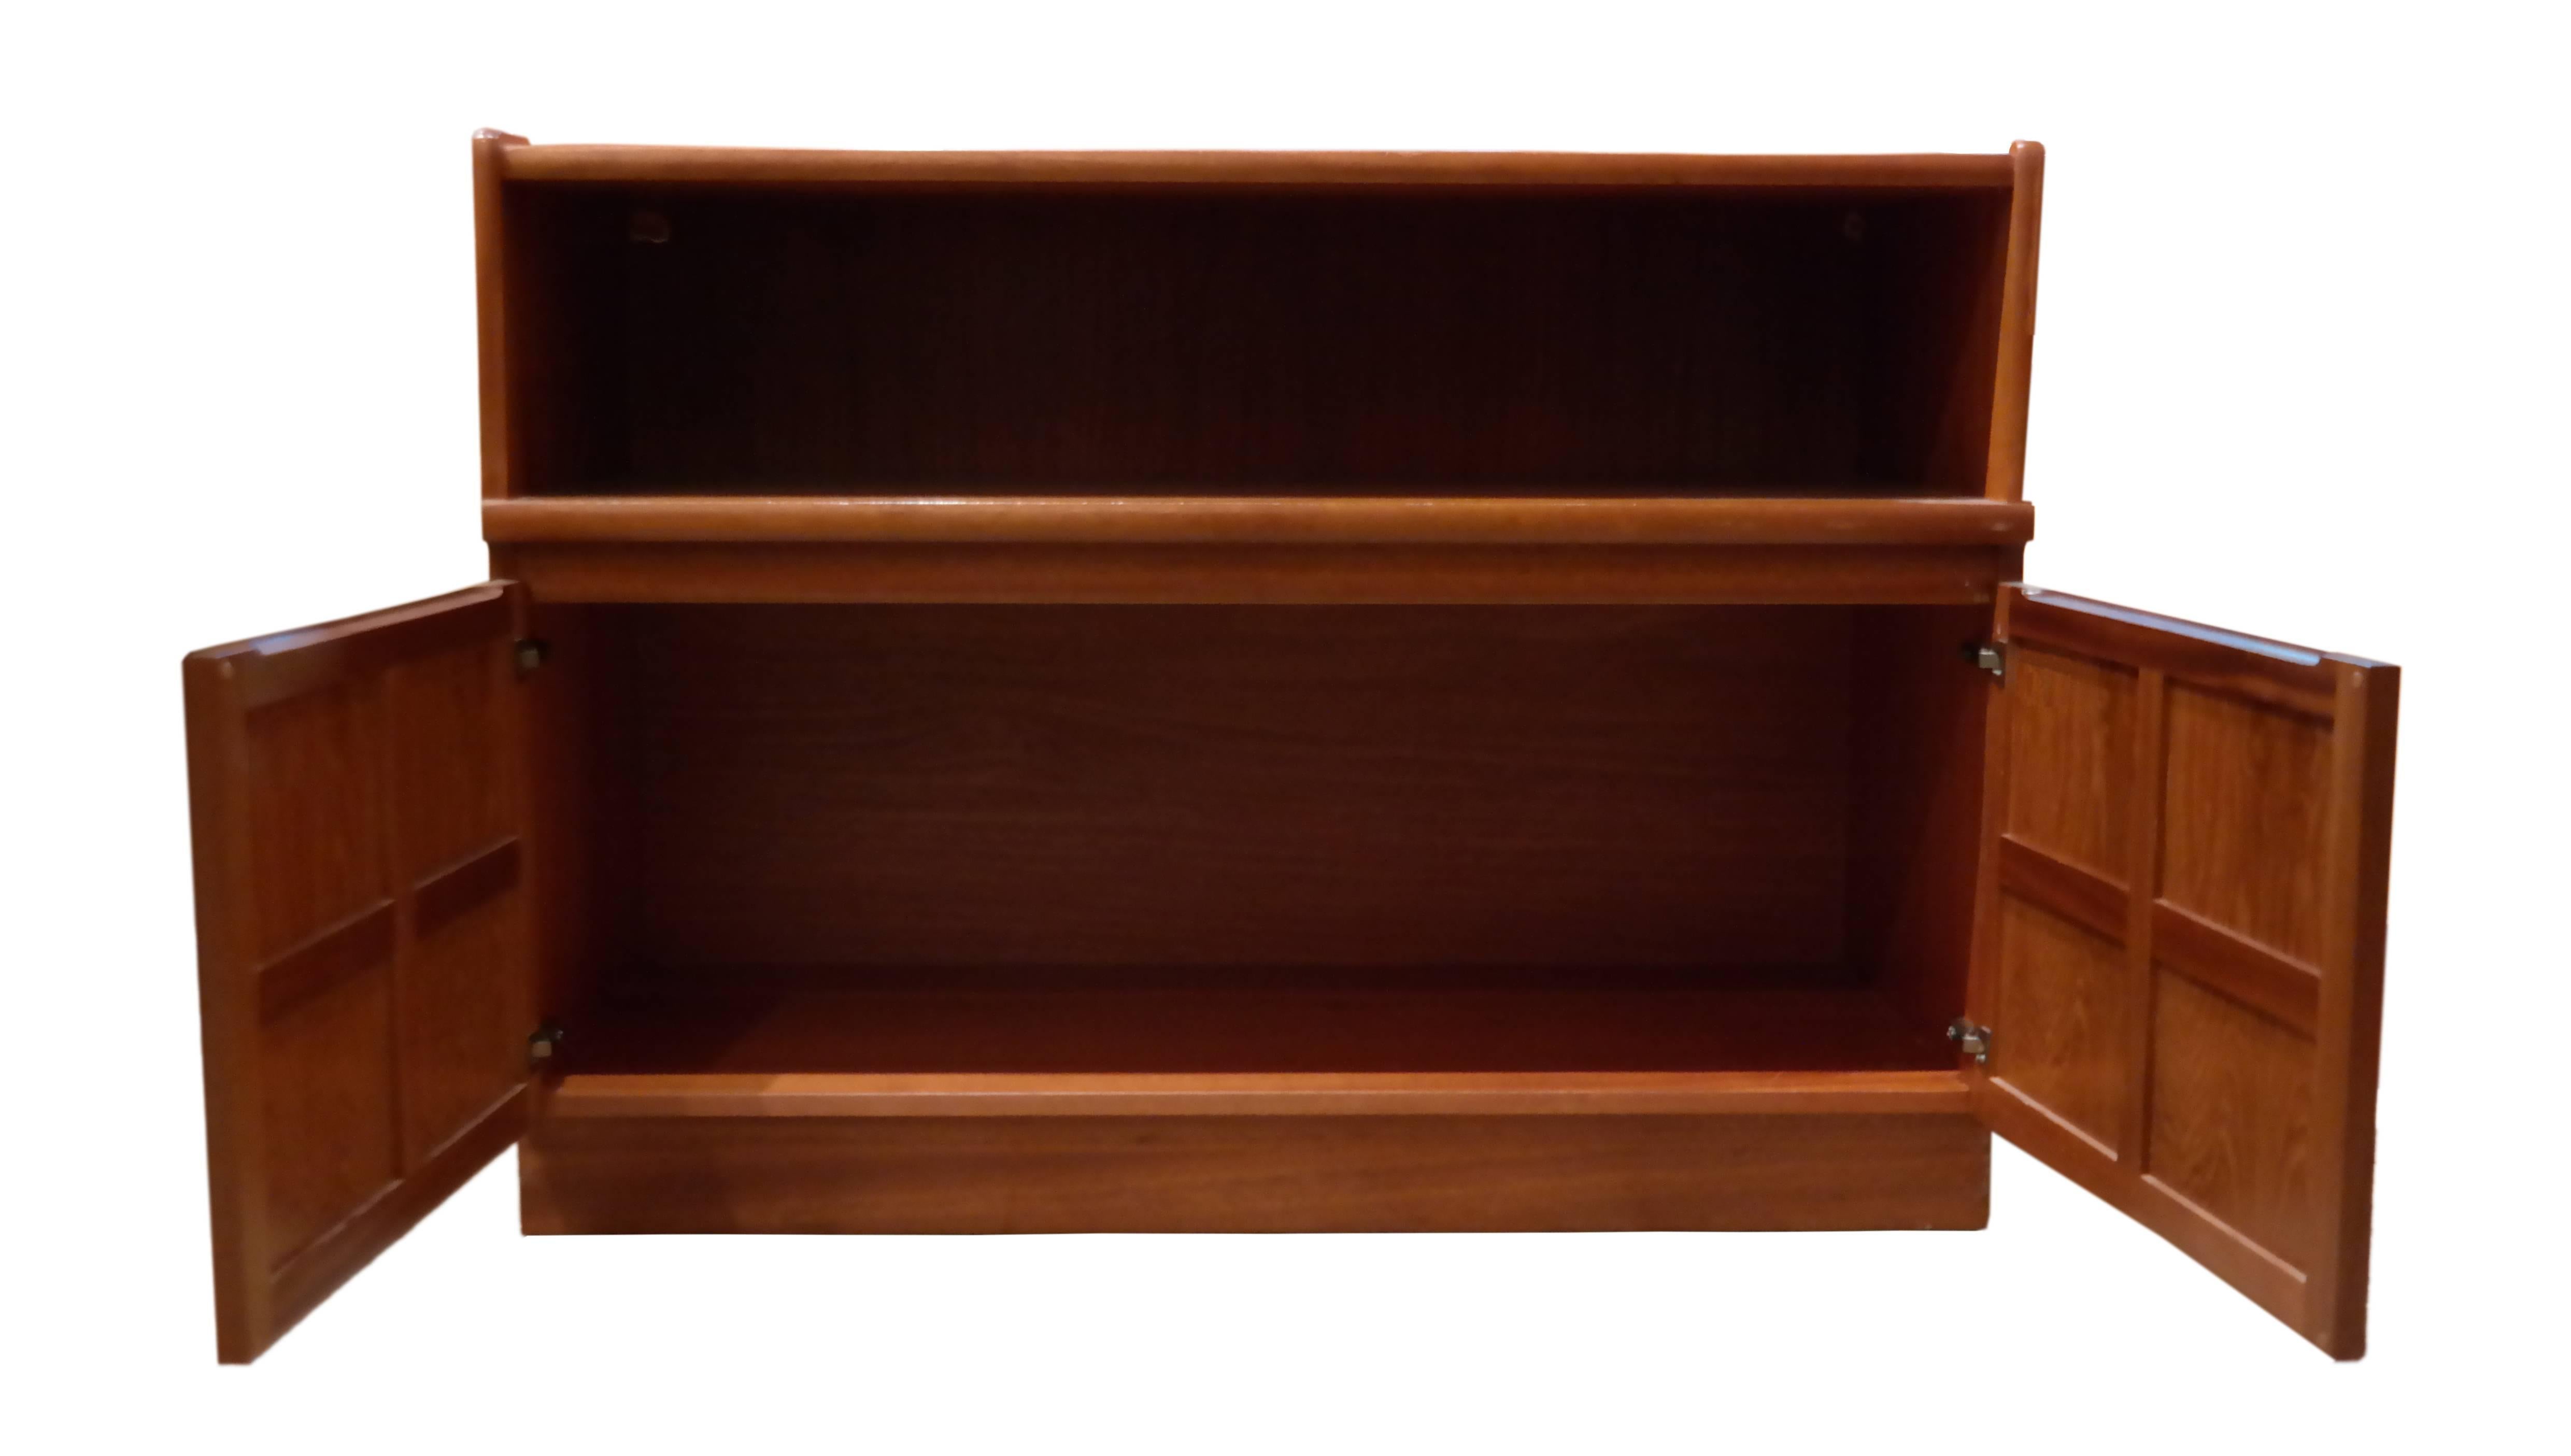 Bookshelf and cabinet English-made by G-Plan, solid teak, 1960s.